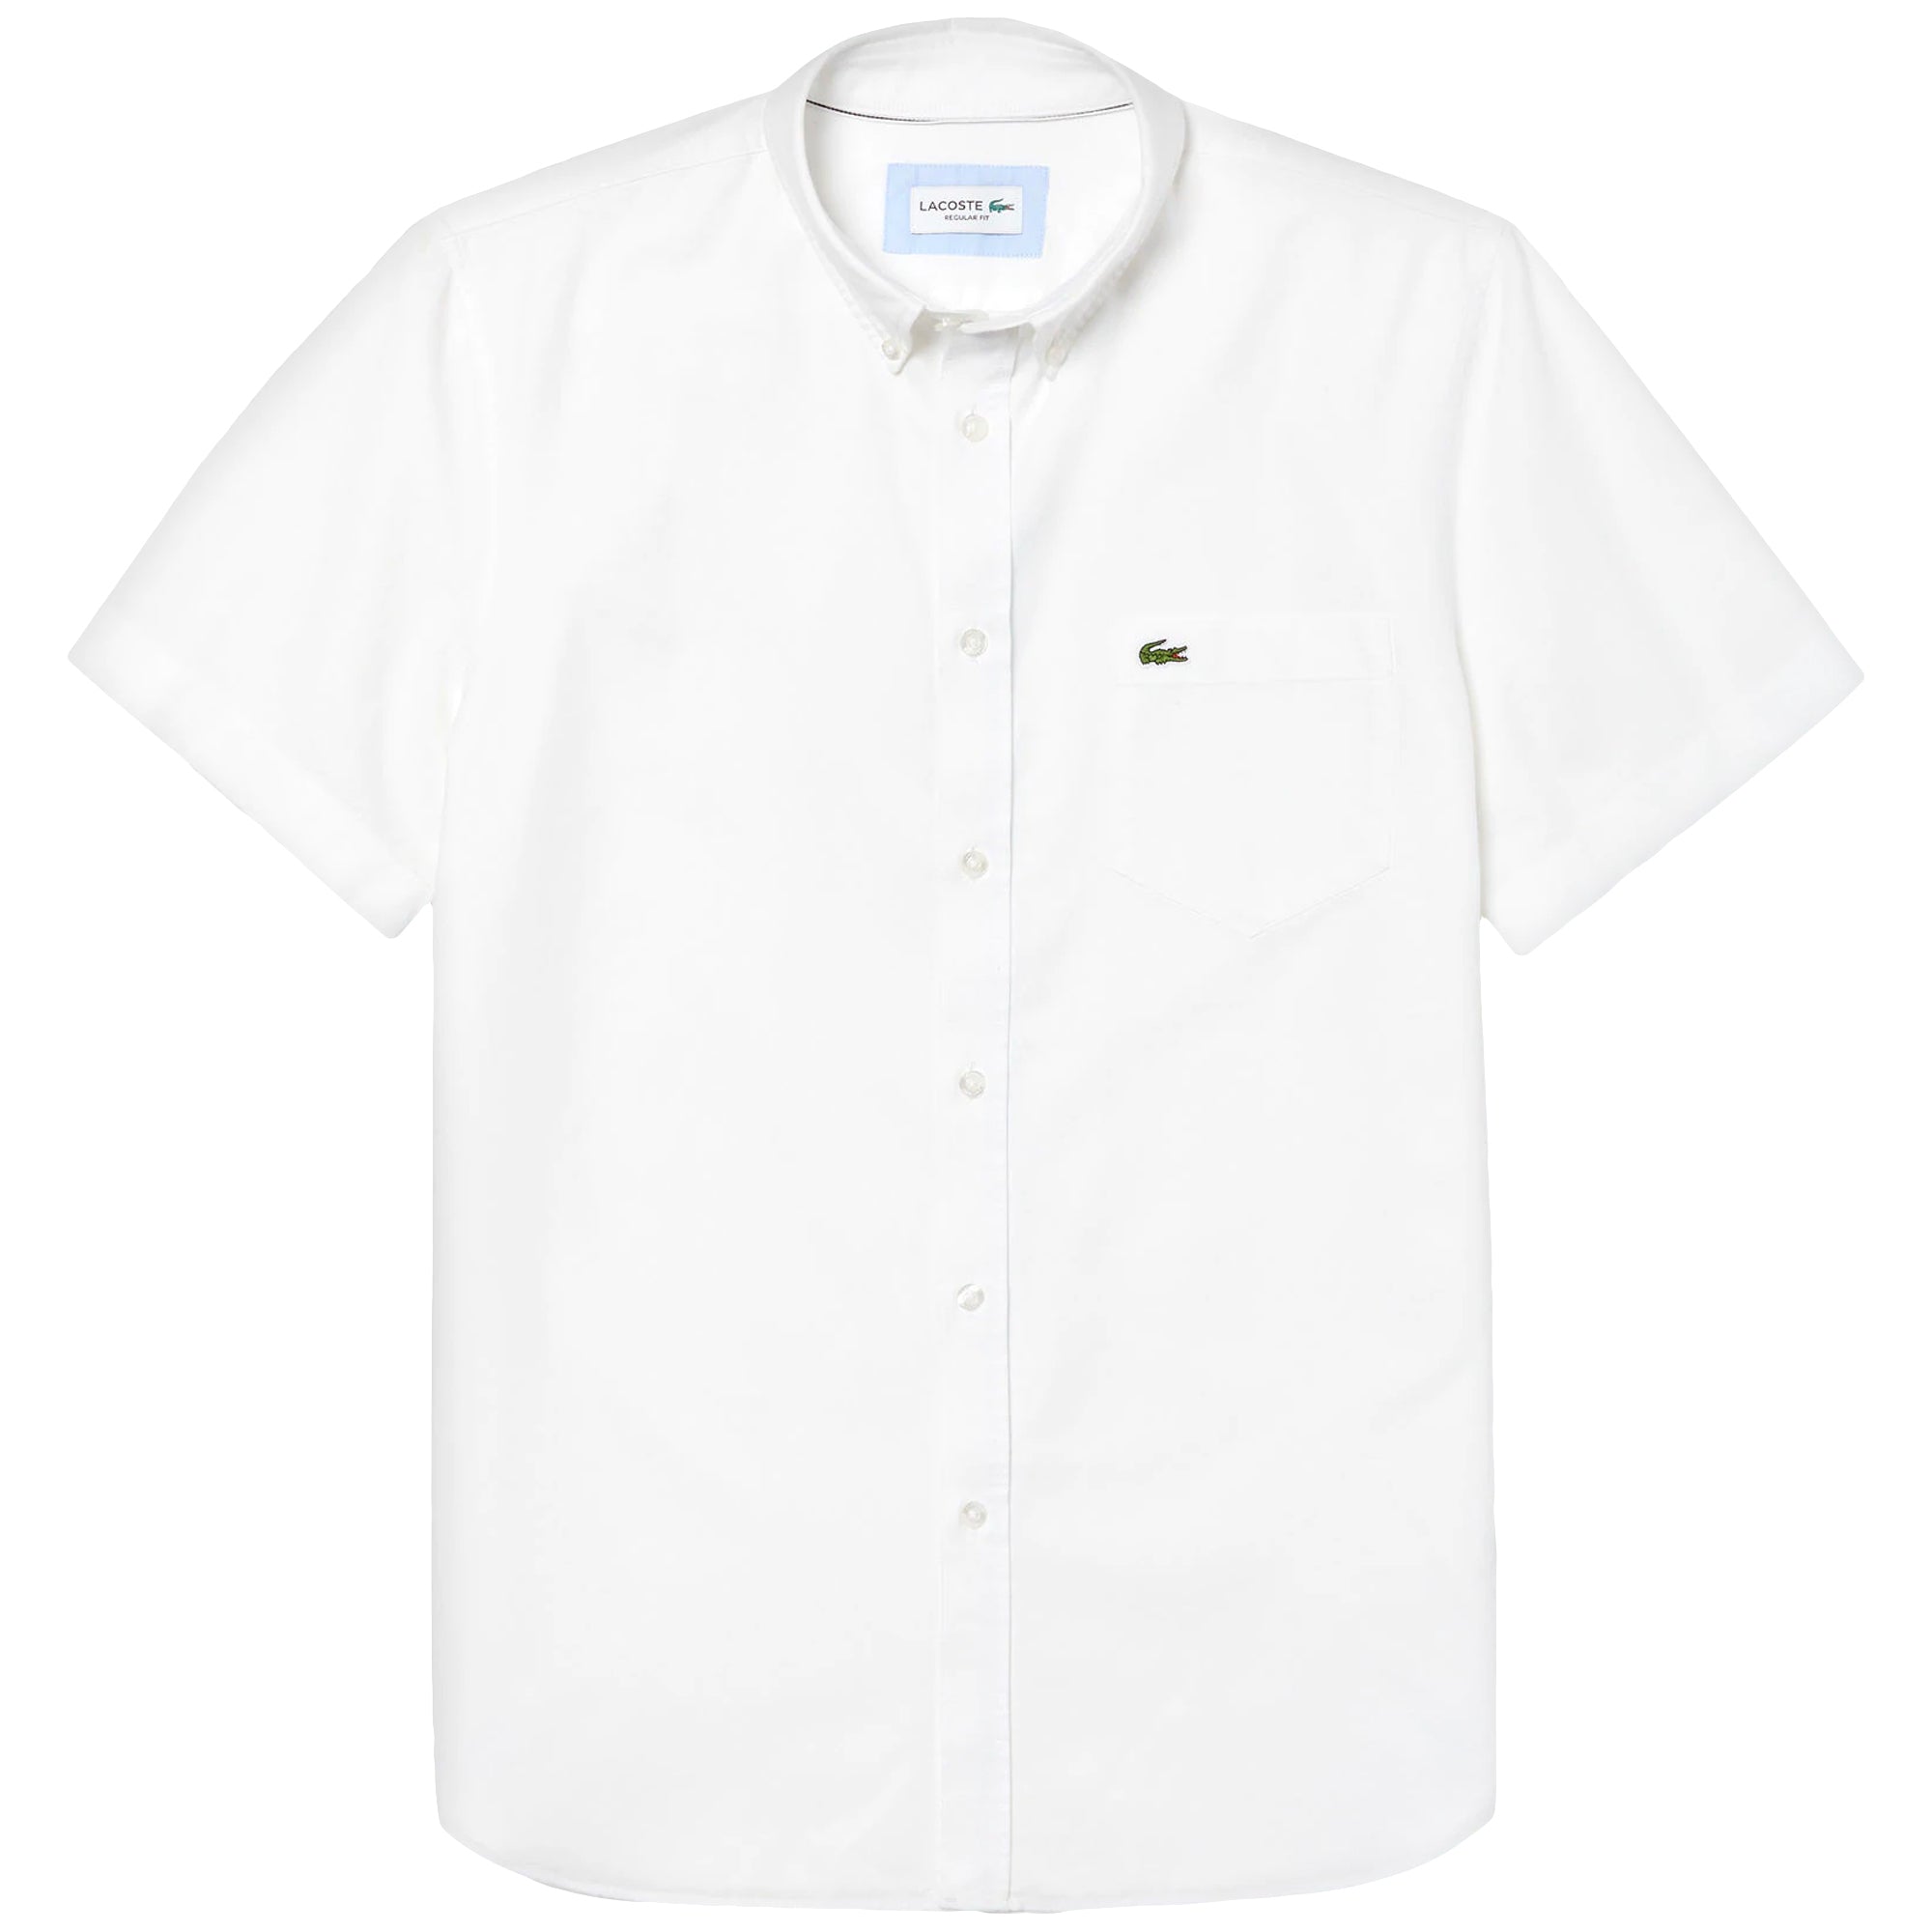 Lacoste Oxford Short Sleeve Shirt CH4975 - White